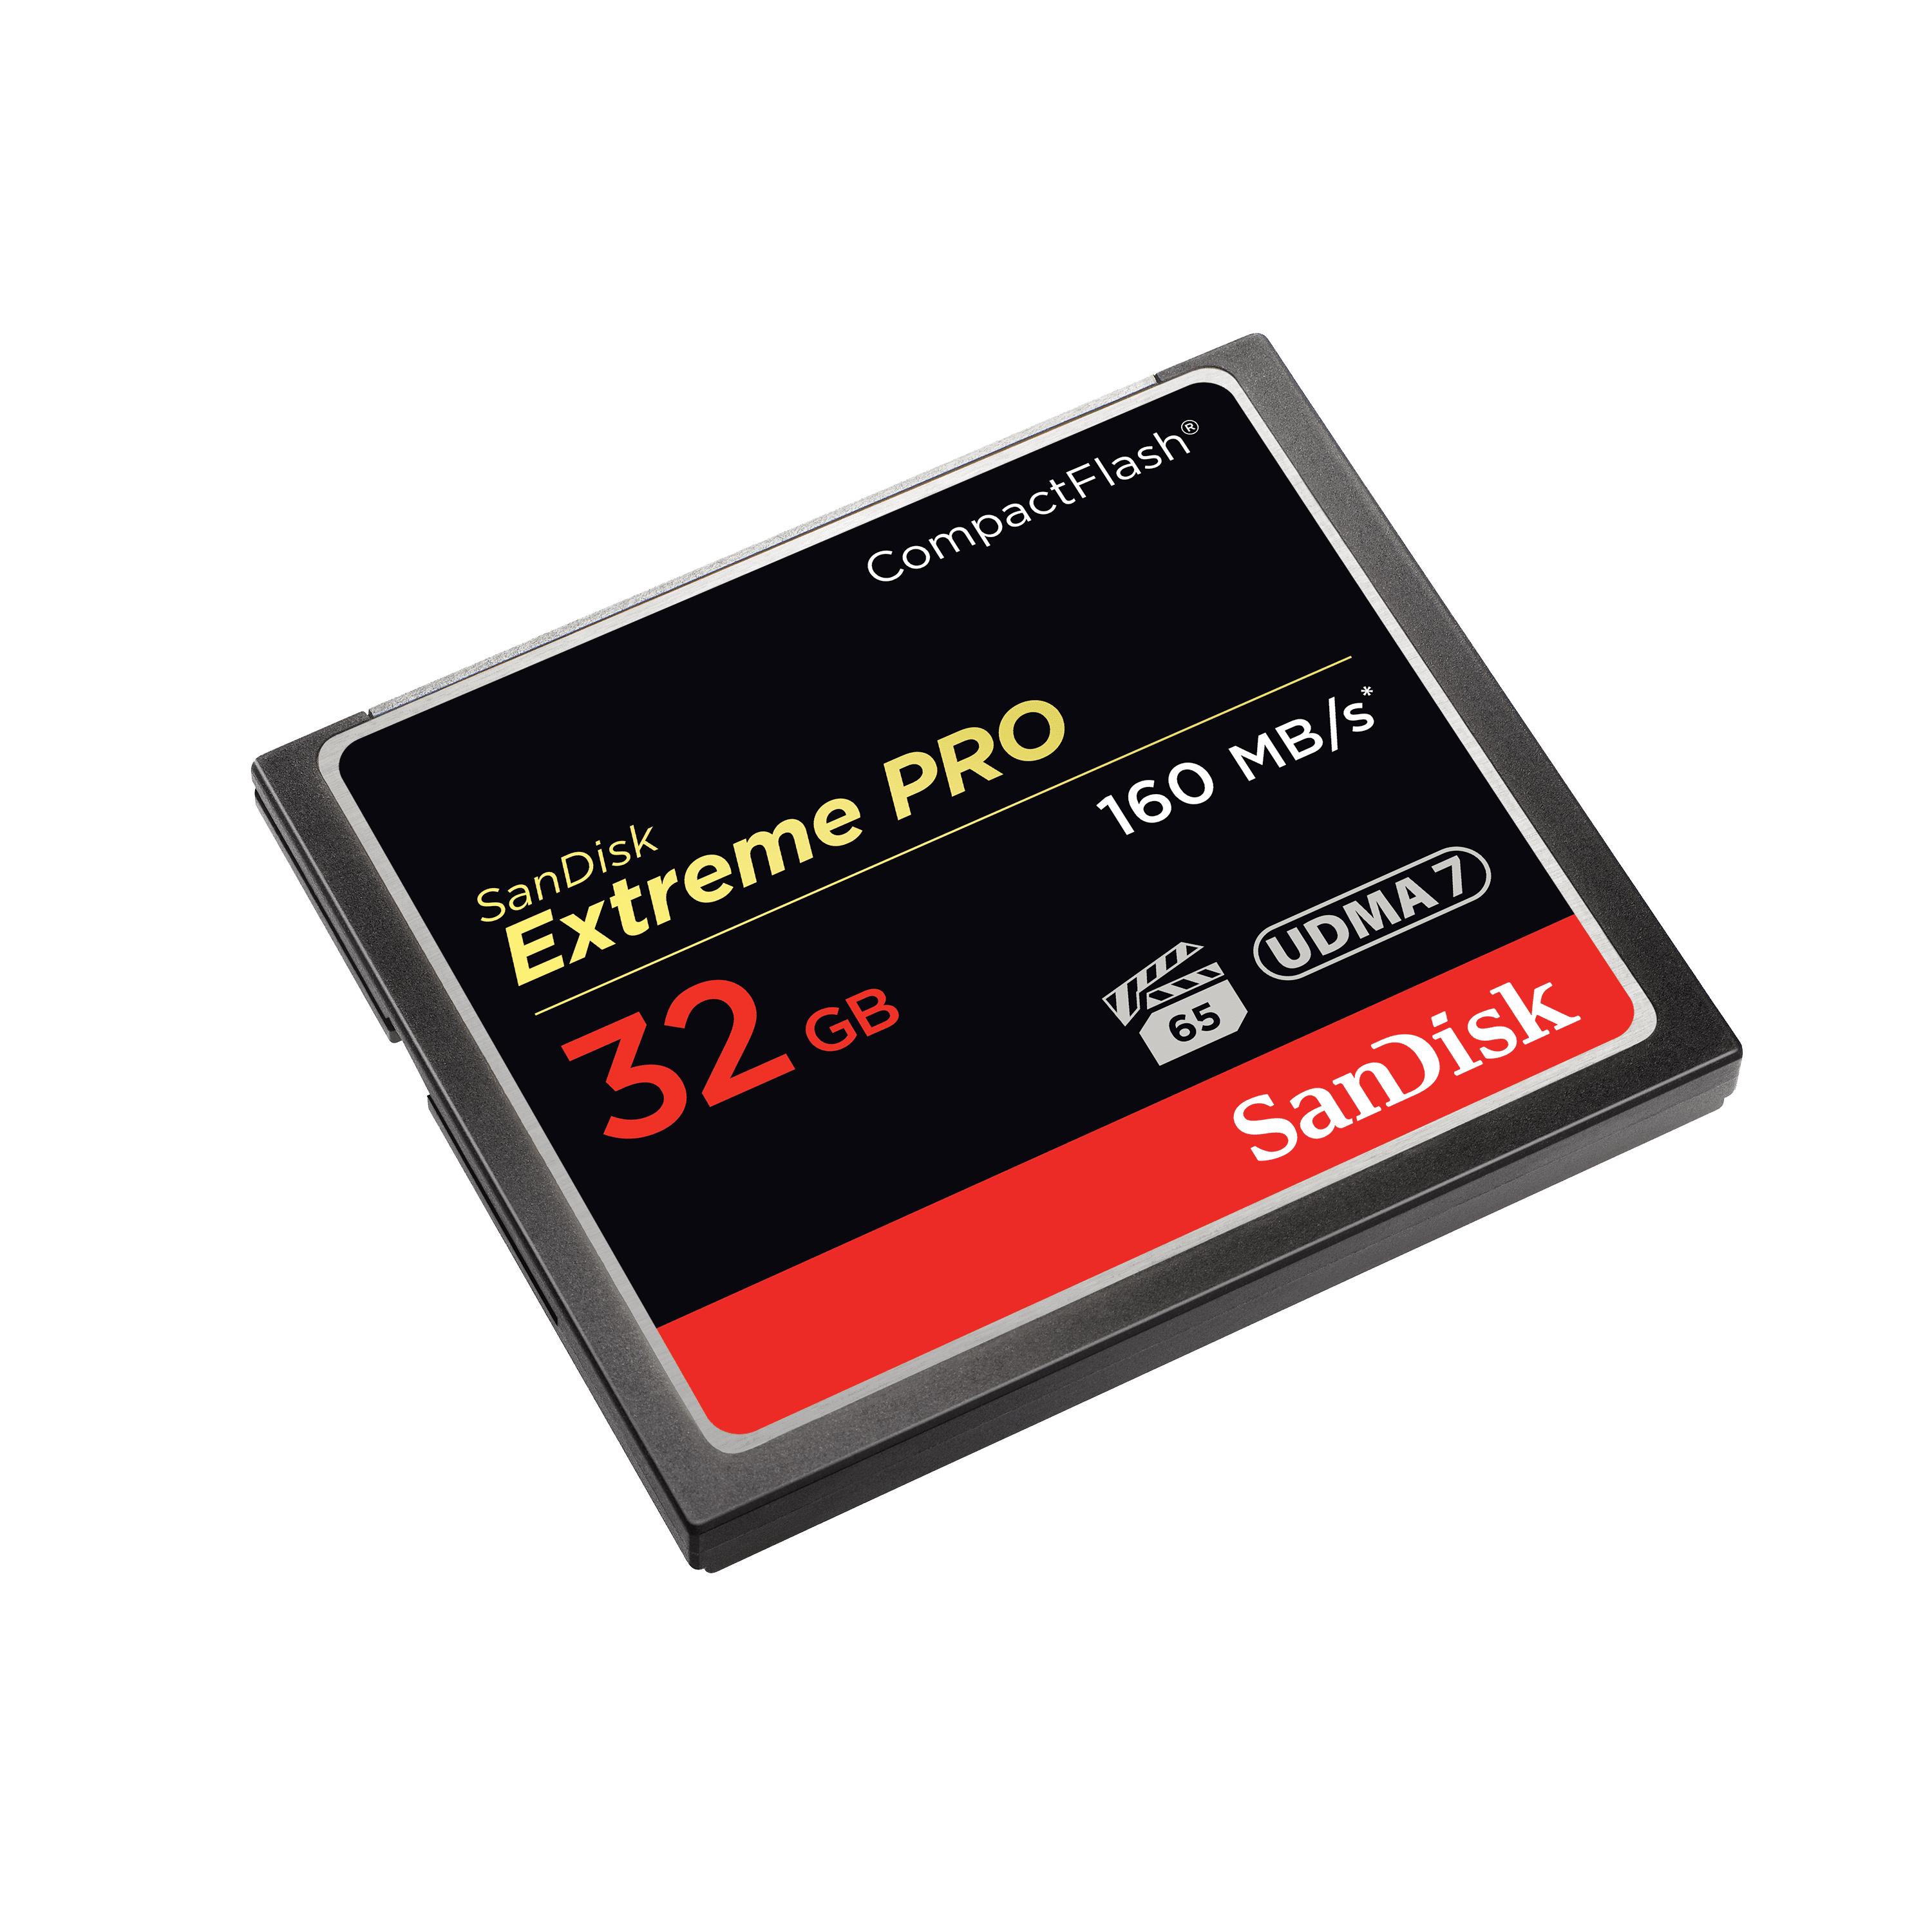 SanDisk 64GB Extreme PRO CompactFlash Memory Card - SDCFXPS-064G-A46